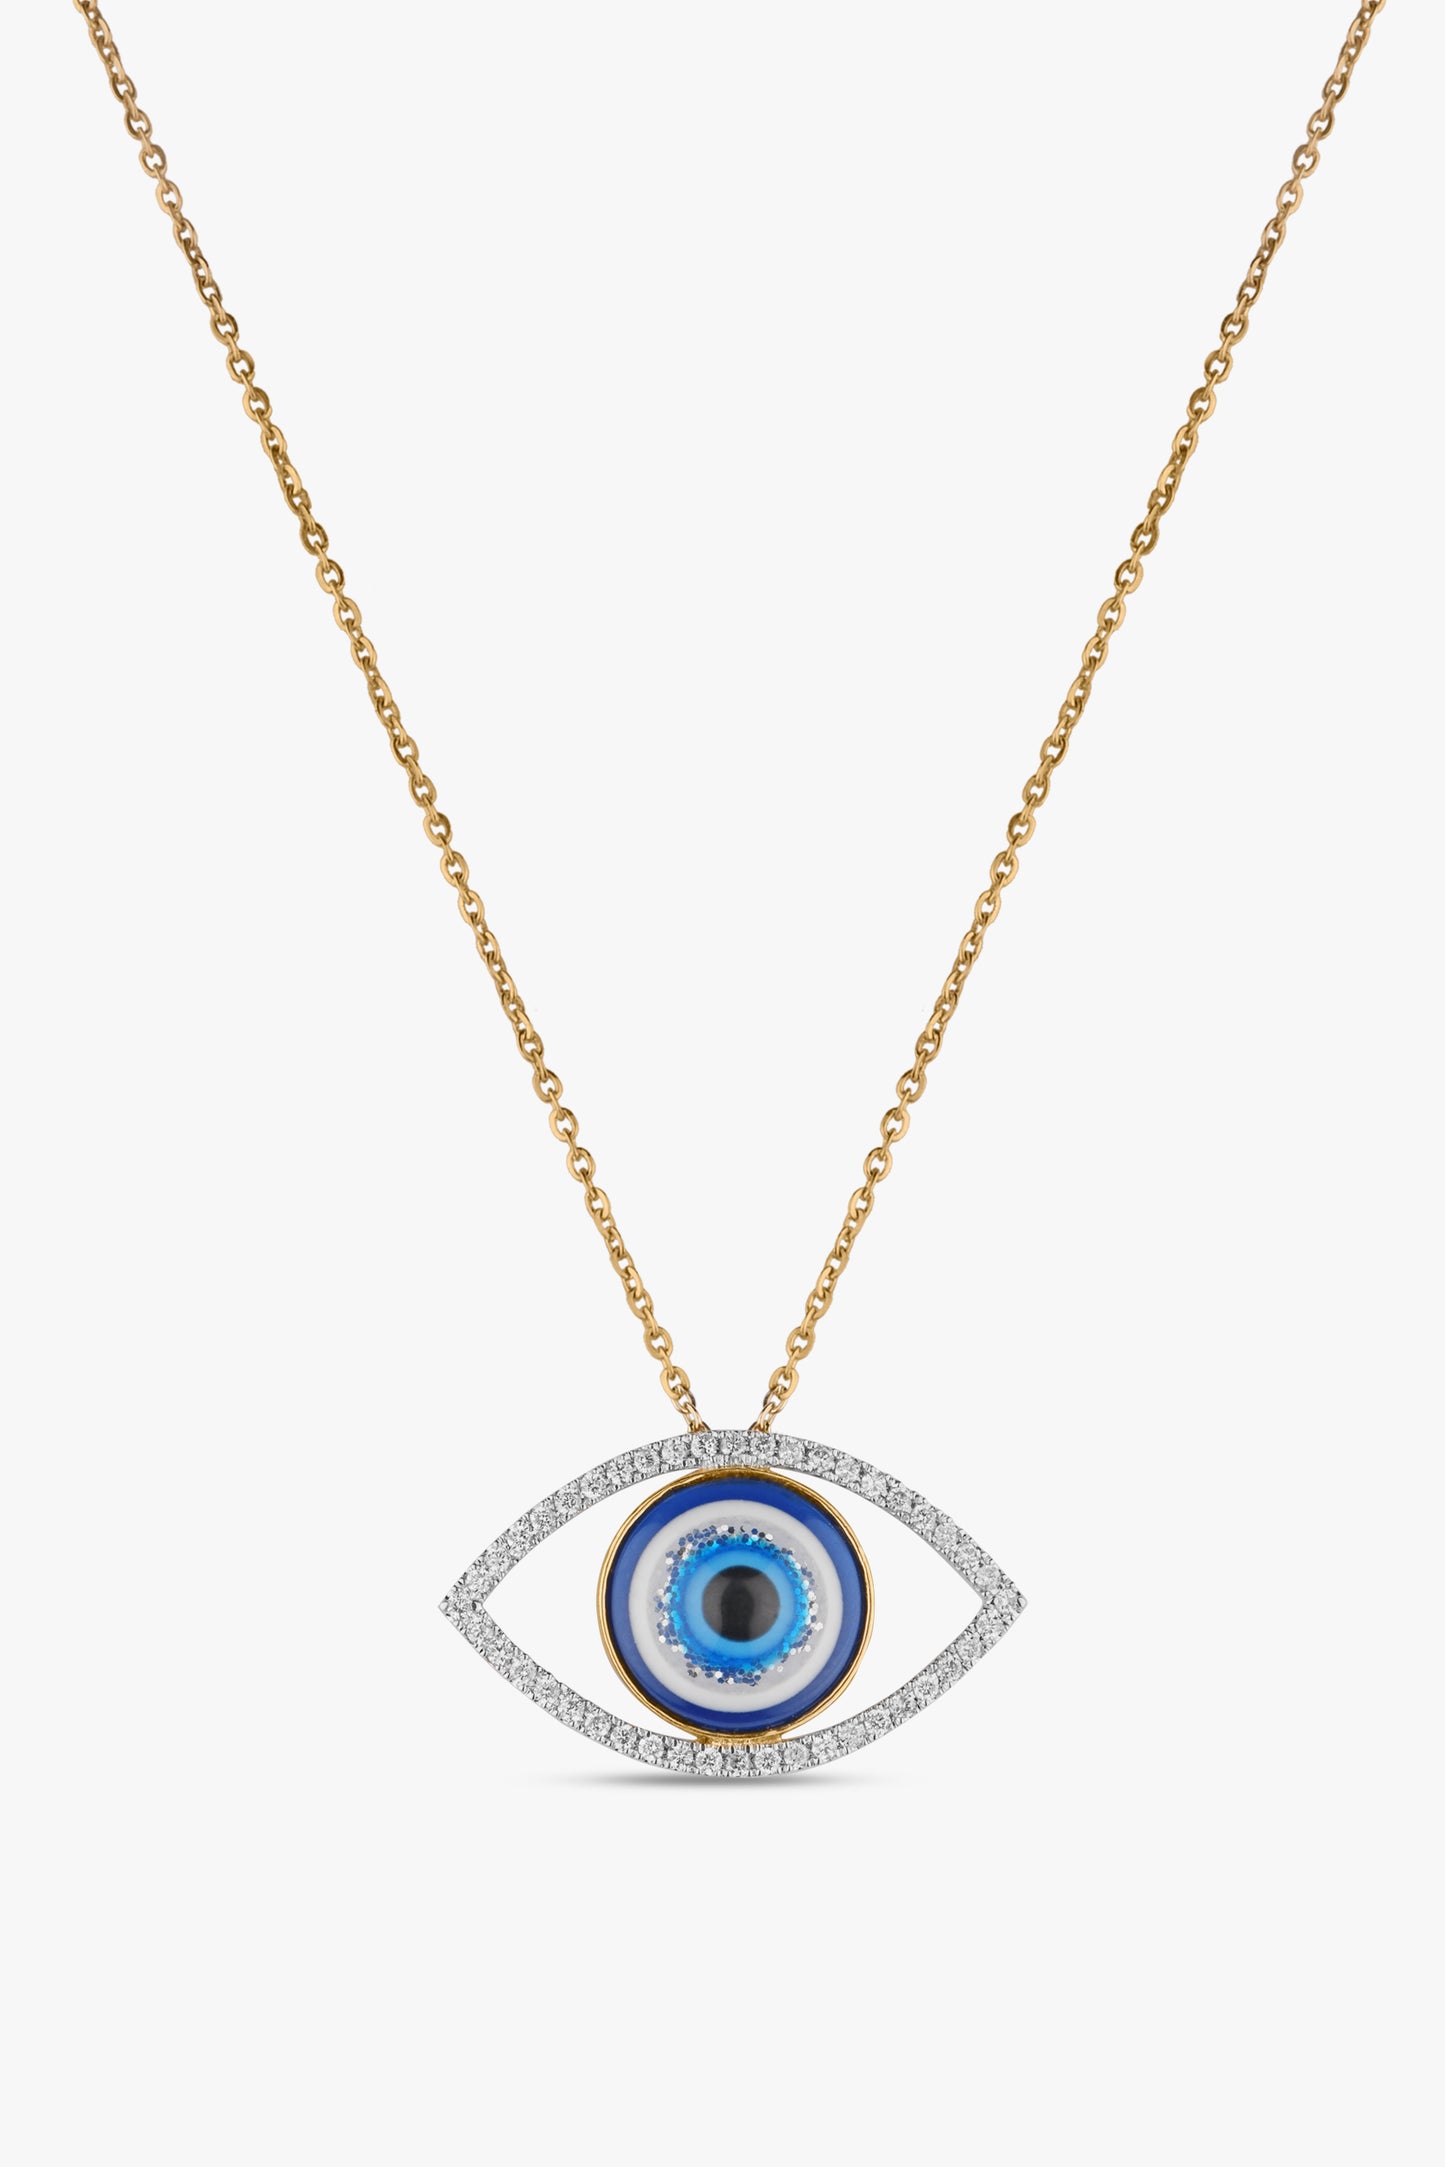 Buy Unreal Realistic Eyeball Necklace, 16 36 Long Chain, Ward off Evil Eye,  Gift Bag , Blue Eye Nazar Jewelry, Males or Females Online in India - Etsy